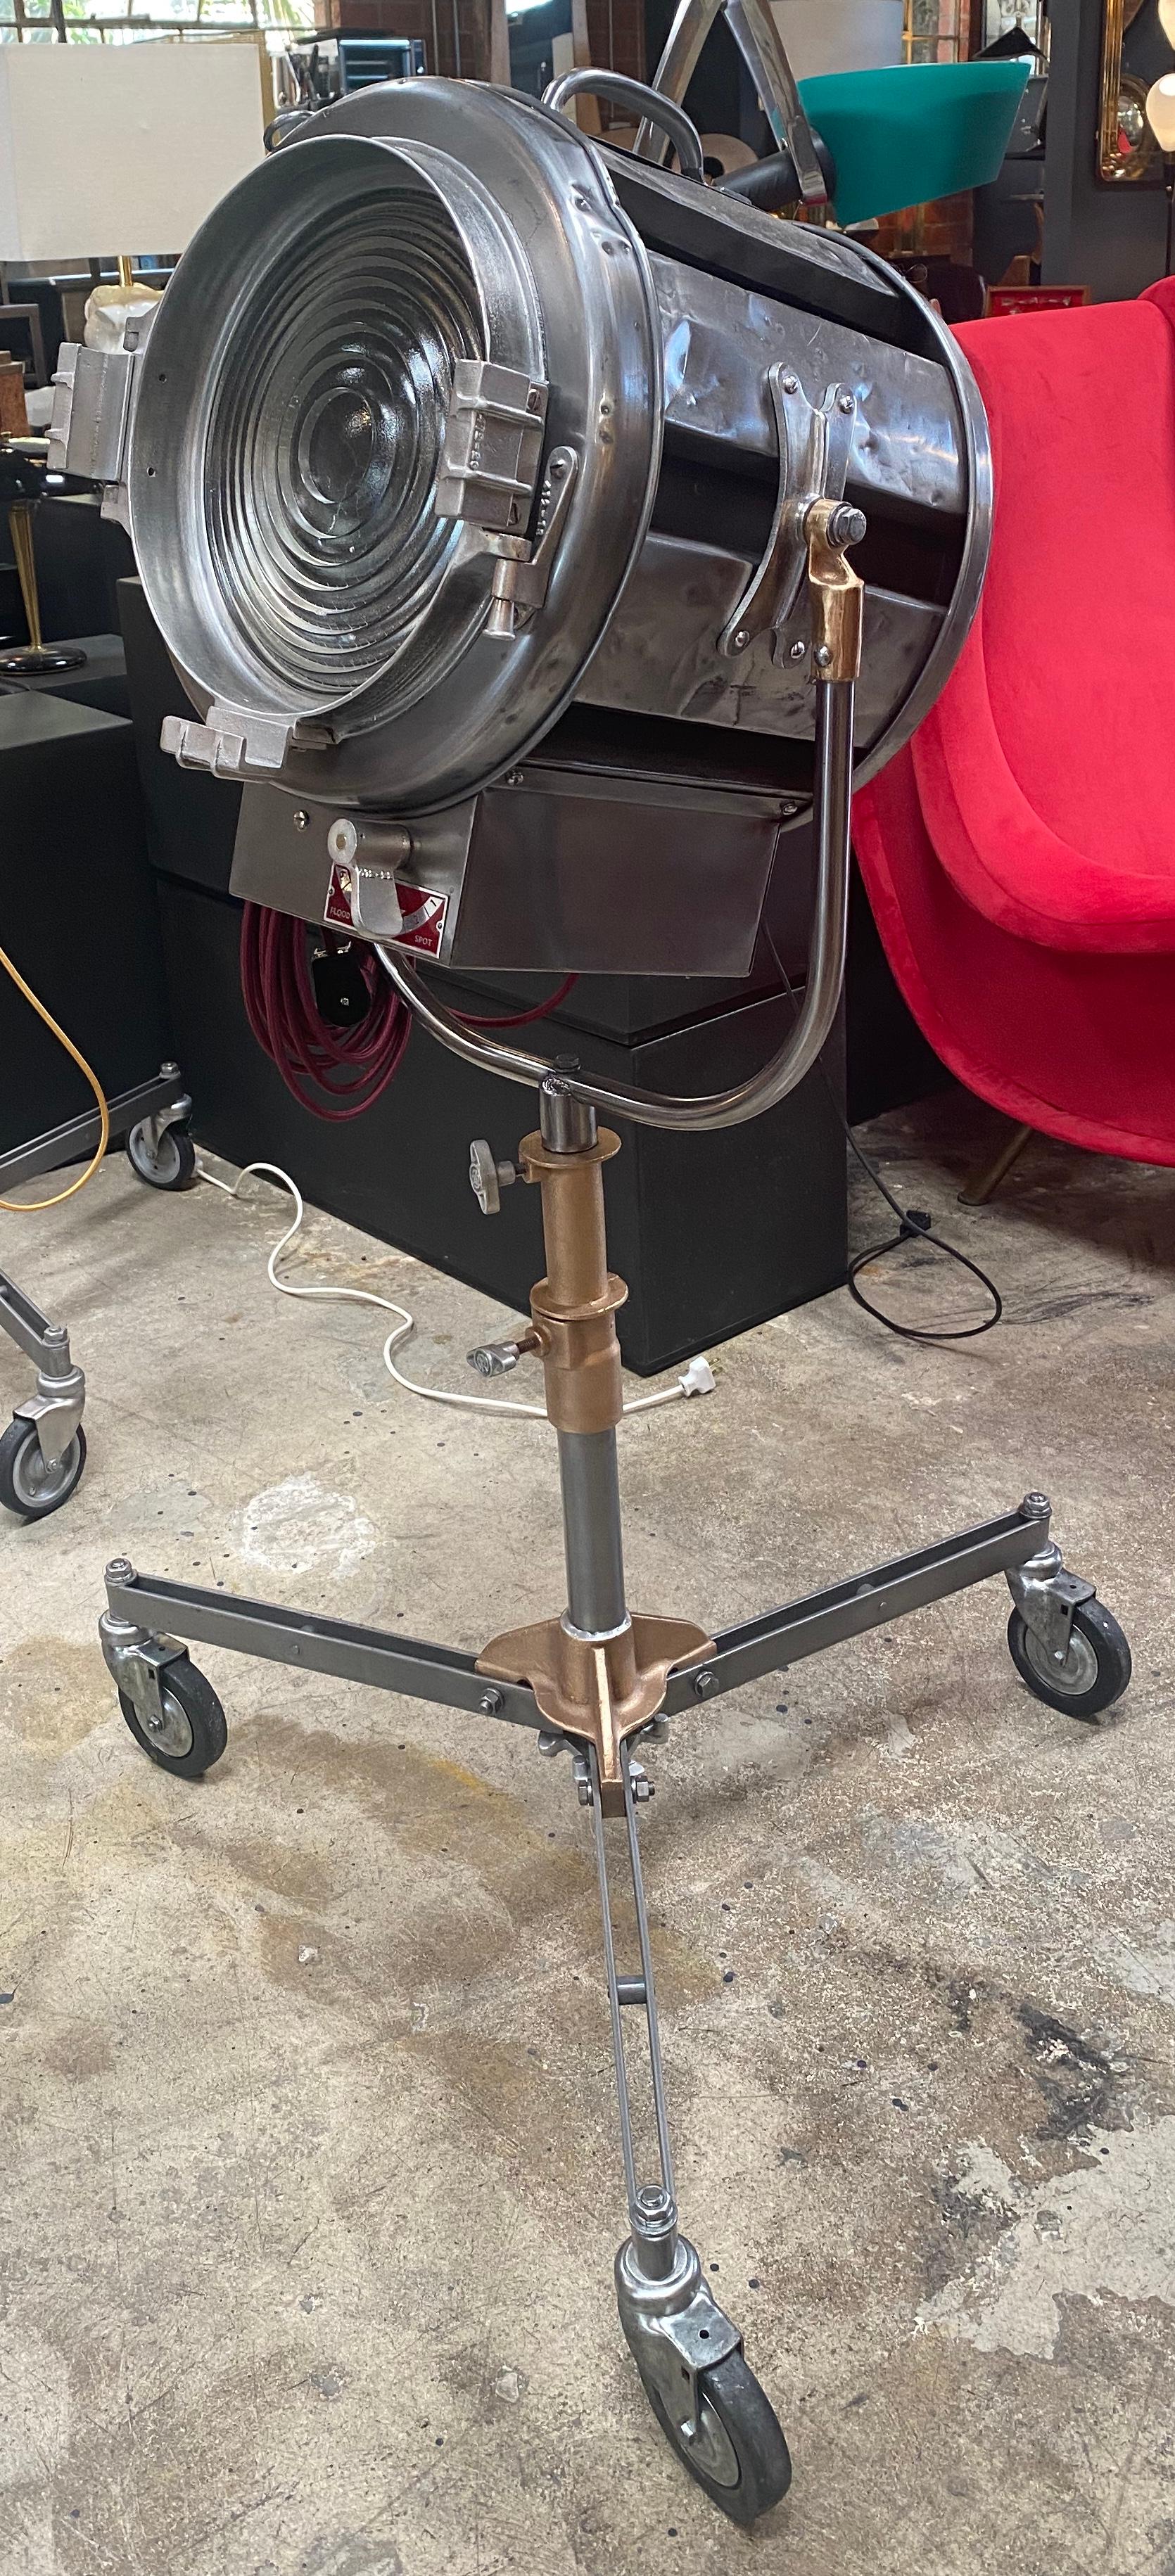 Classic film studio light made by Mole Richardson, Inc. of Hollywood, CA during the Golden Era of film, direct from the Paramount Studios Lot. Repurposed Vintage Hollywood Movie Light rewired with standard Edison E26 socket and bulb to be used as a